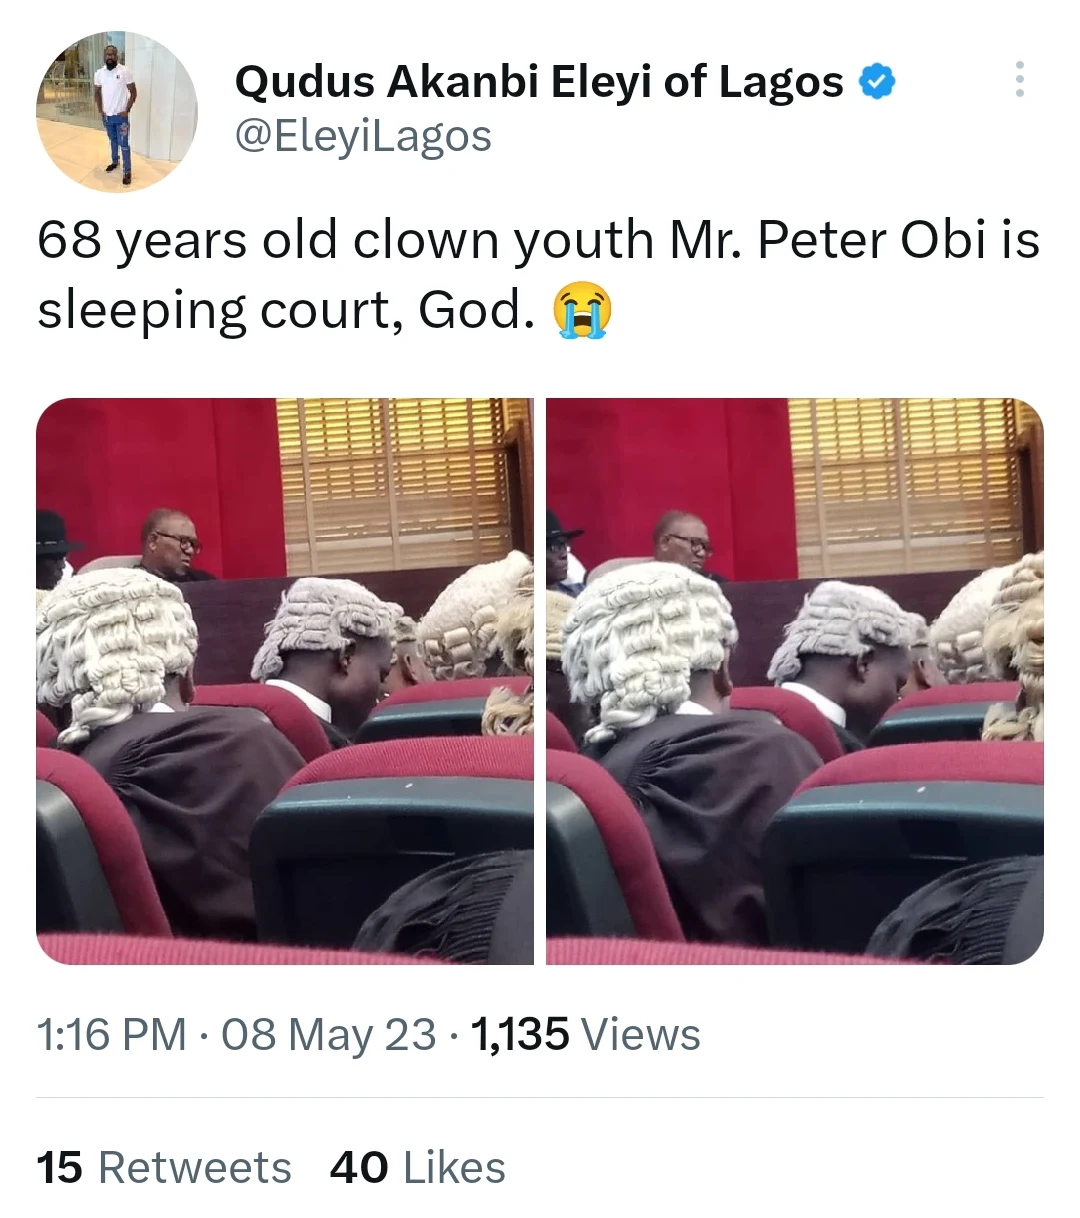 Nigerians React to Peter Obi's Court Nap: Exhaustion or Disrespect?